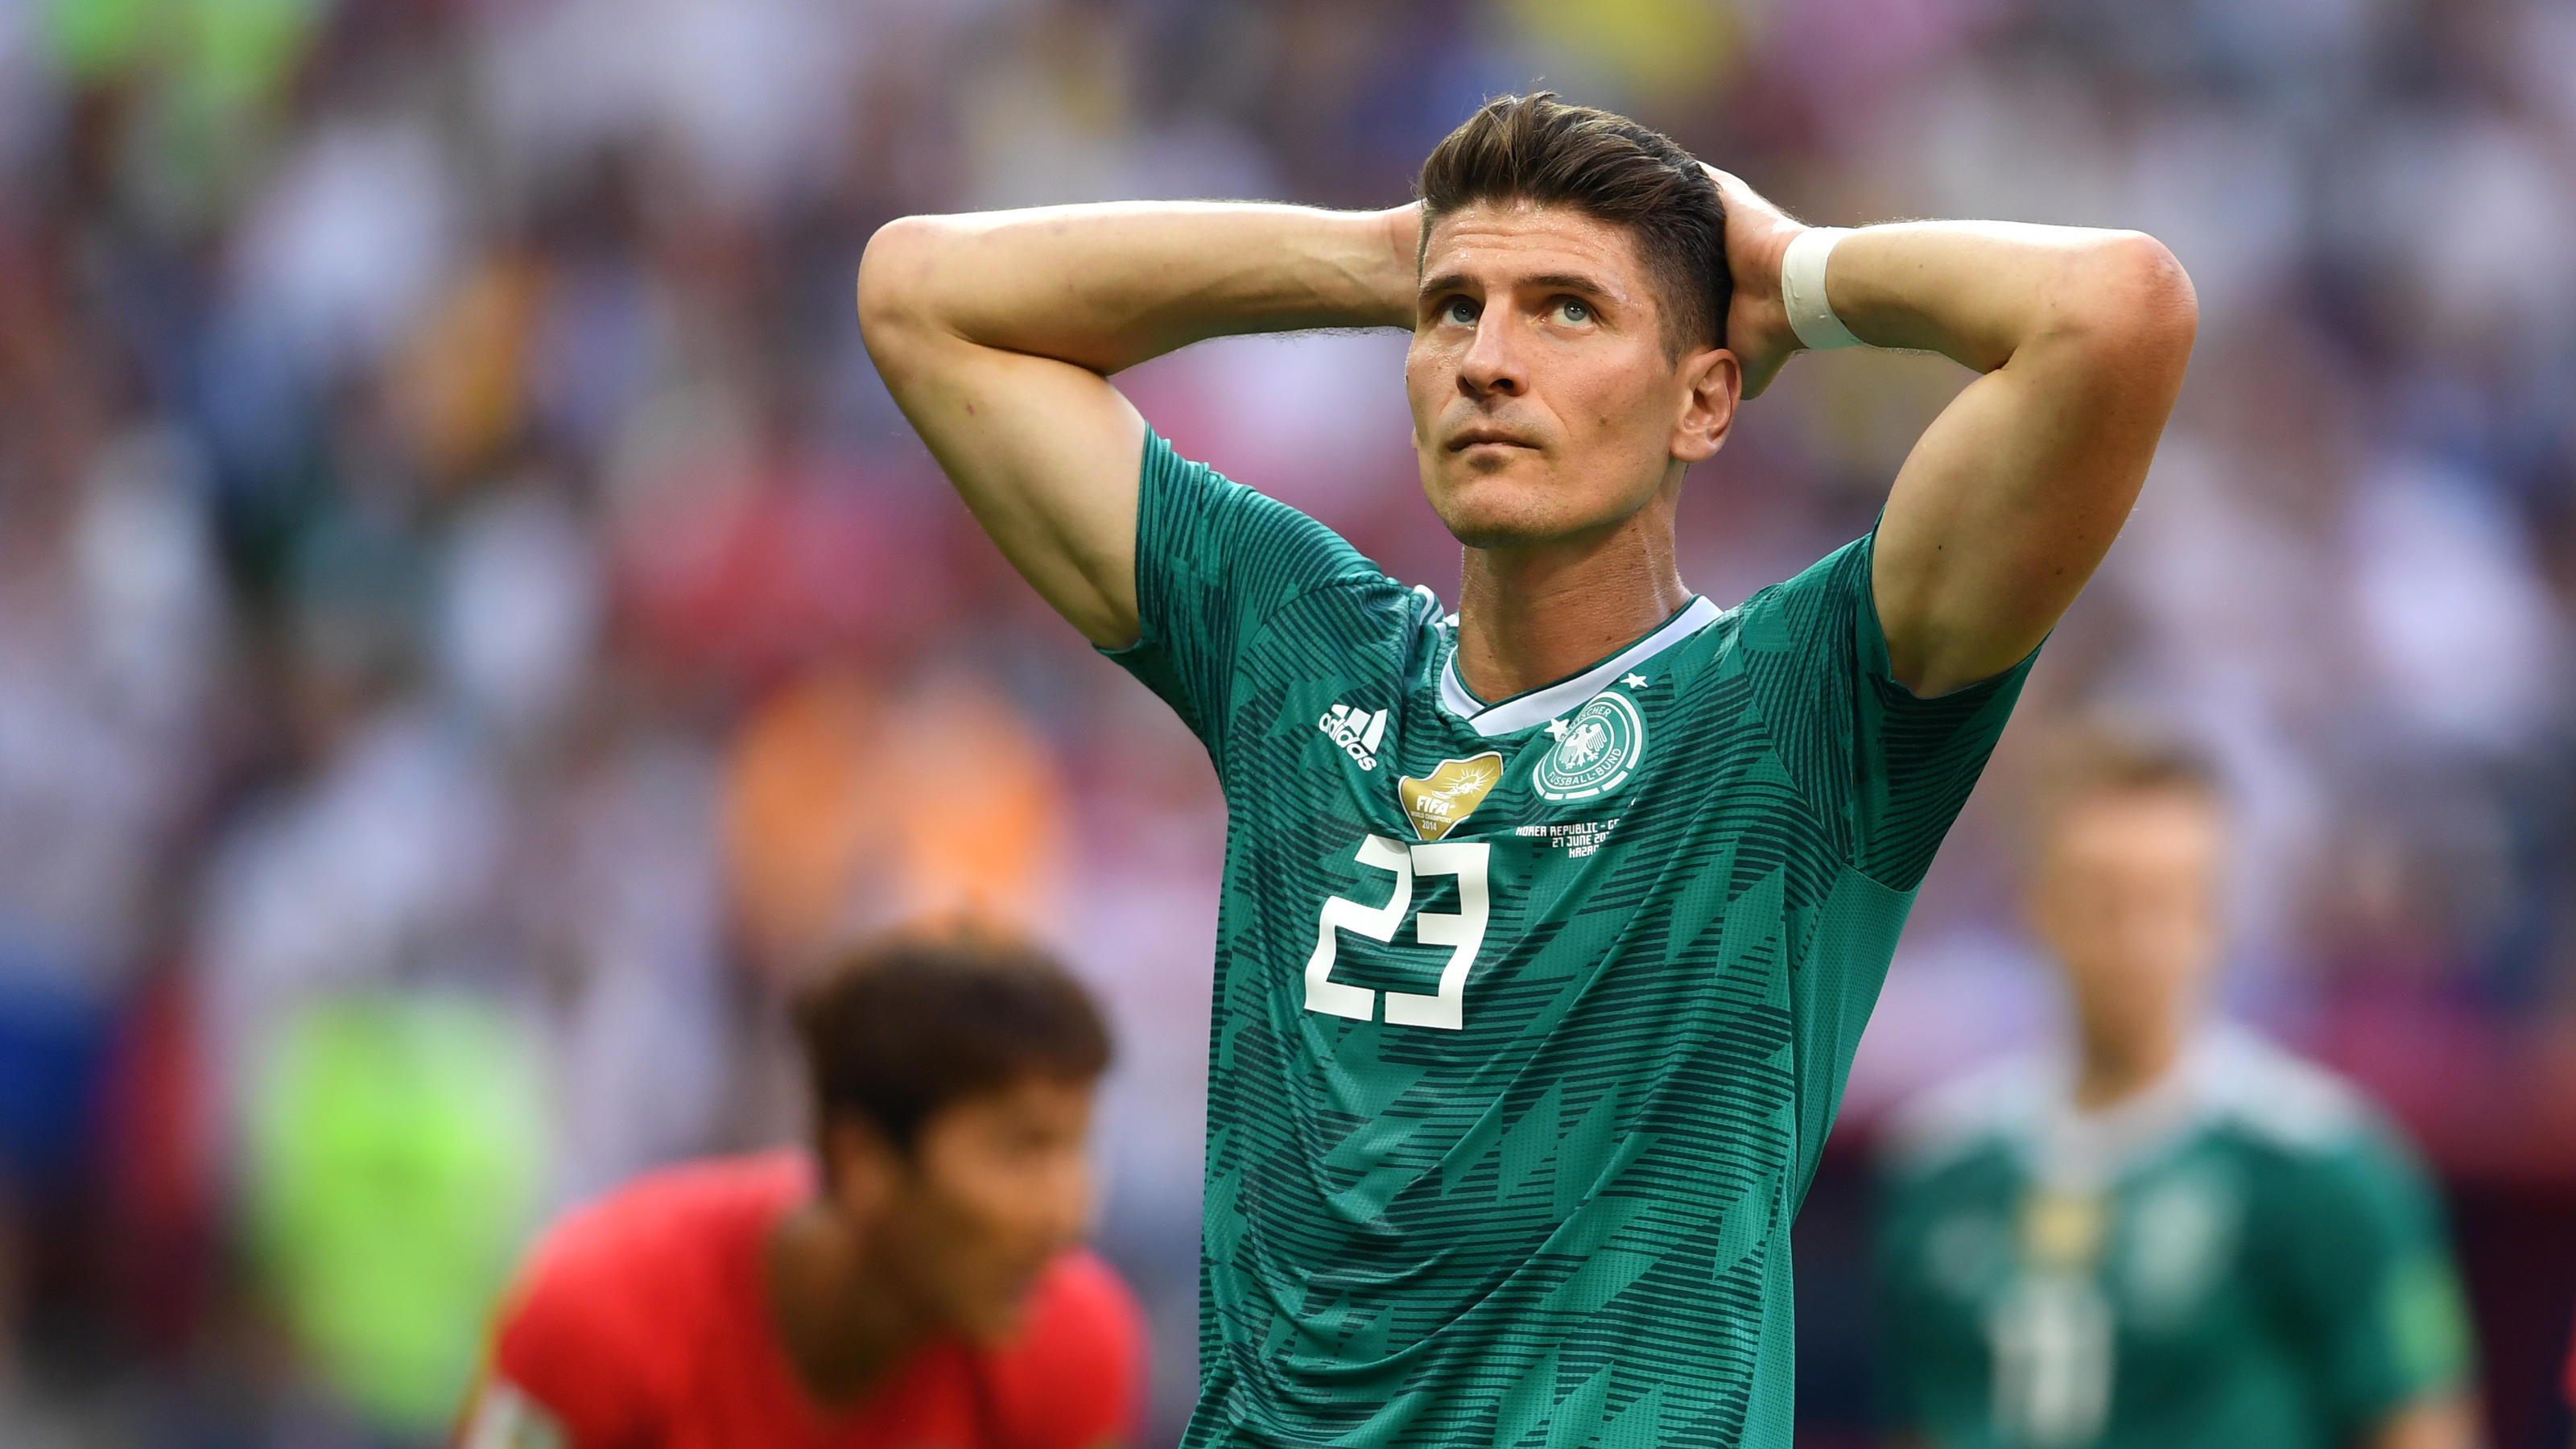 KAZAN, RUSSIA - JUNE 27:  Mario Gomez of Germany looks dejected following the 2018 FIFA World Cup Russia group F match between Korea Republic and Germany at Kazan Arena on June 27, 2018 in Kazan, Russia.  (Photo by Laurence Griffiths/Getty Images)